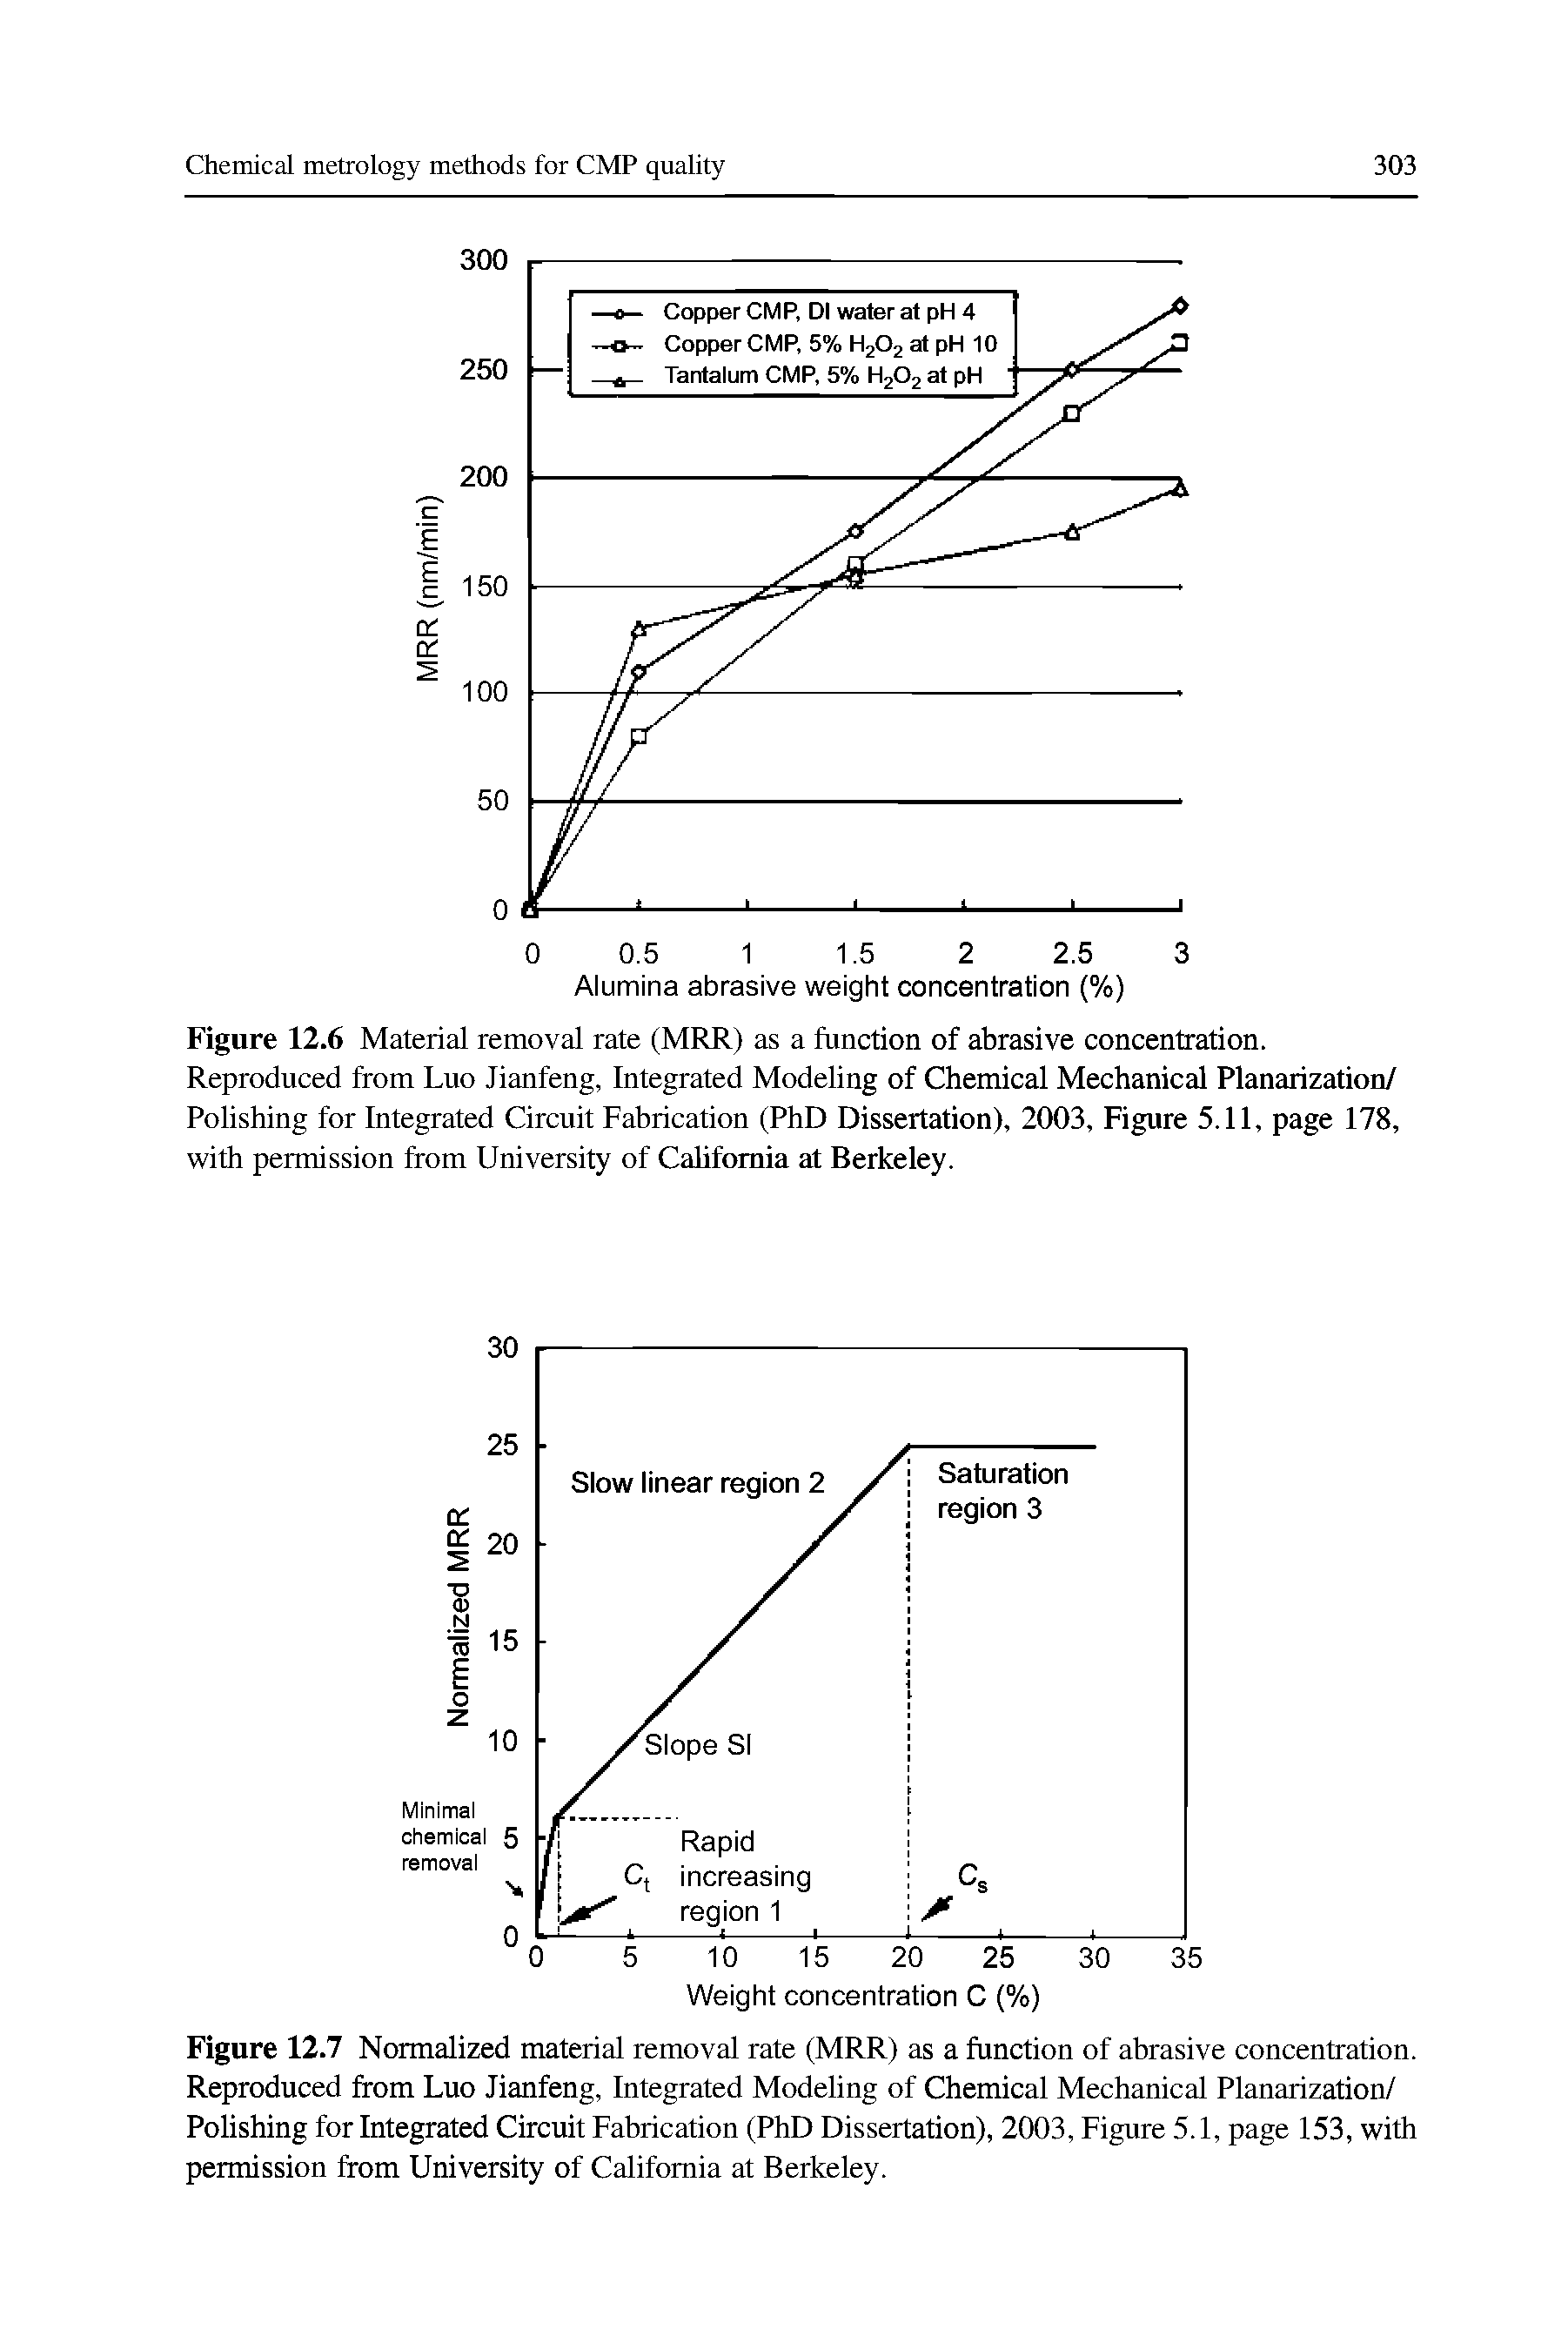 Figure 12.6 Material removal rate (MRR) as a function of abrasive concentration. Reproduced from Luo Jianfeng, Integrated Modeling of Chemical Mechanical Planarization/ Polishing for Integrated Circuit Fabrication (PhD Dissertation), 2003, Figure 5.11, page 178, with permission from University of California at Berkeiey.